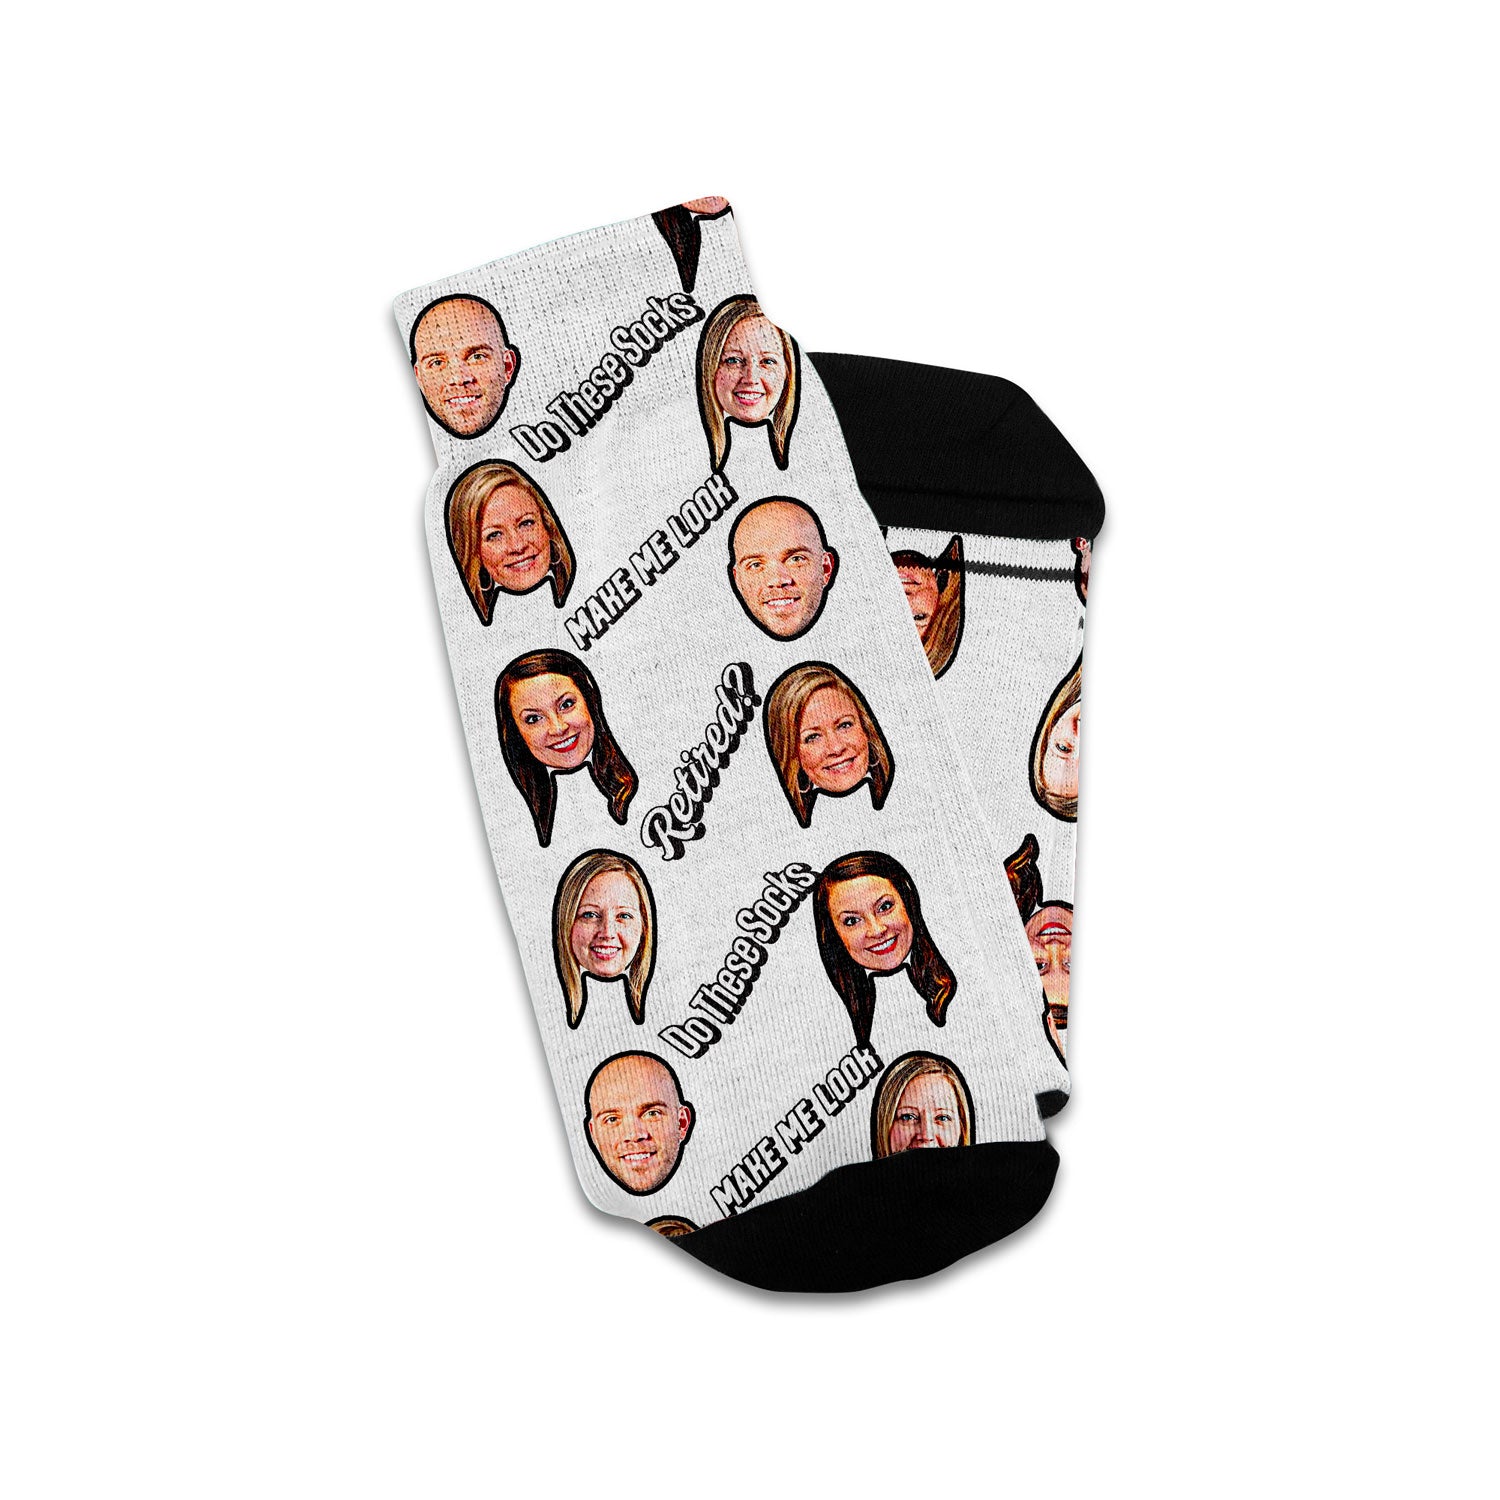 Retirement gift for coworker personalized socks with faces